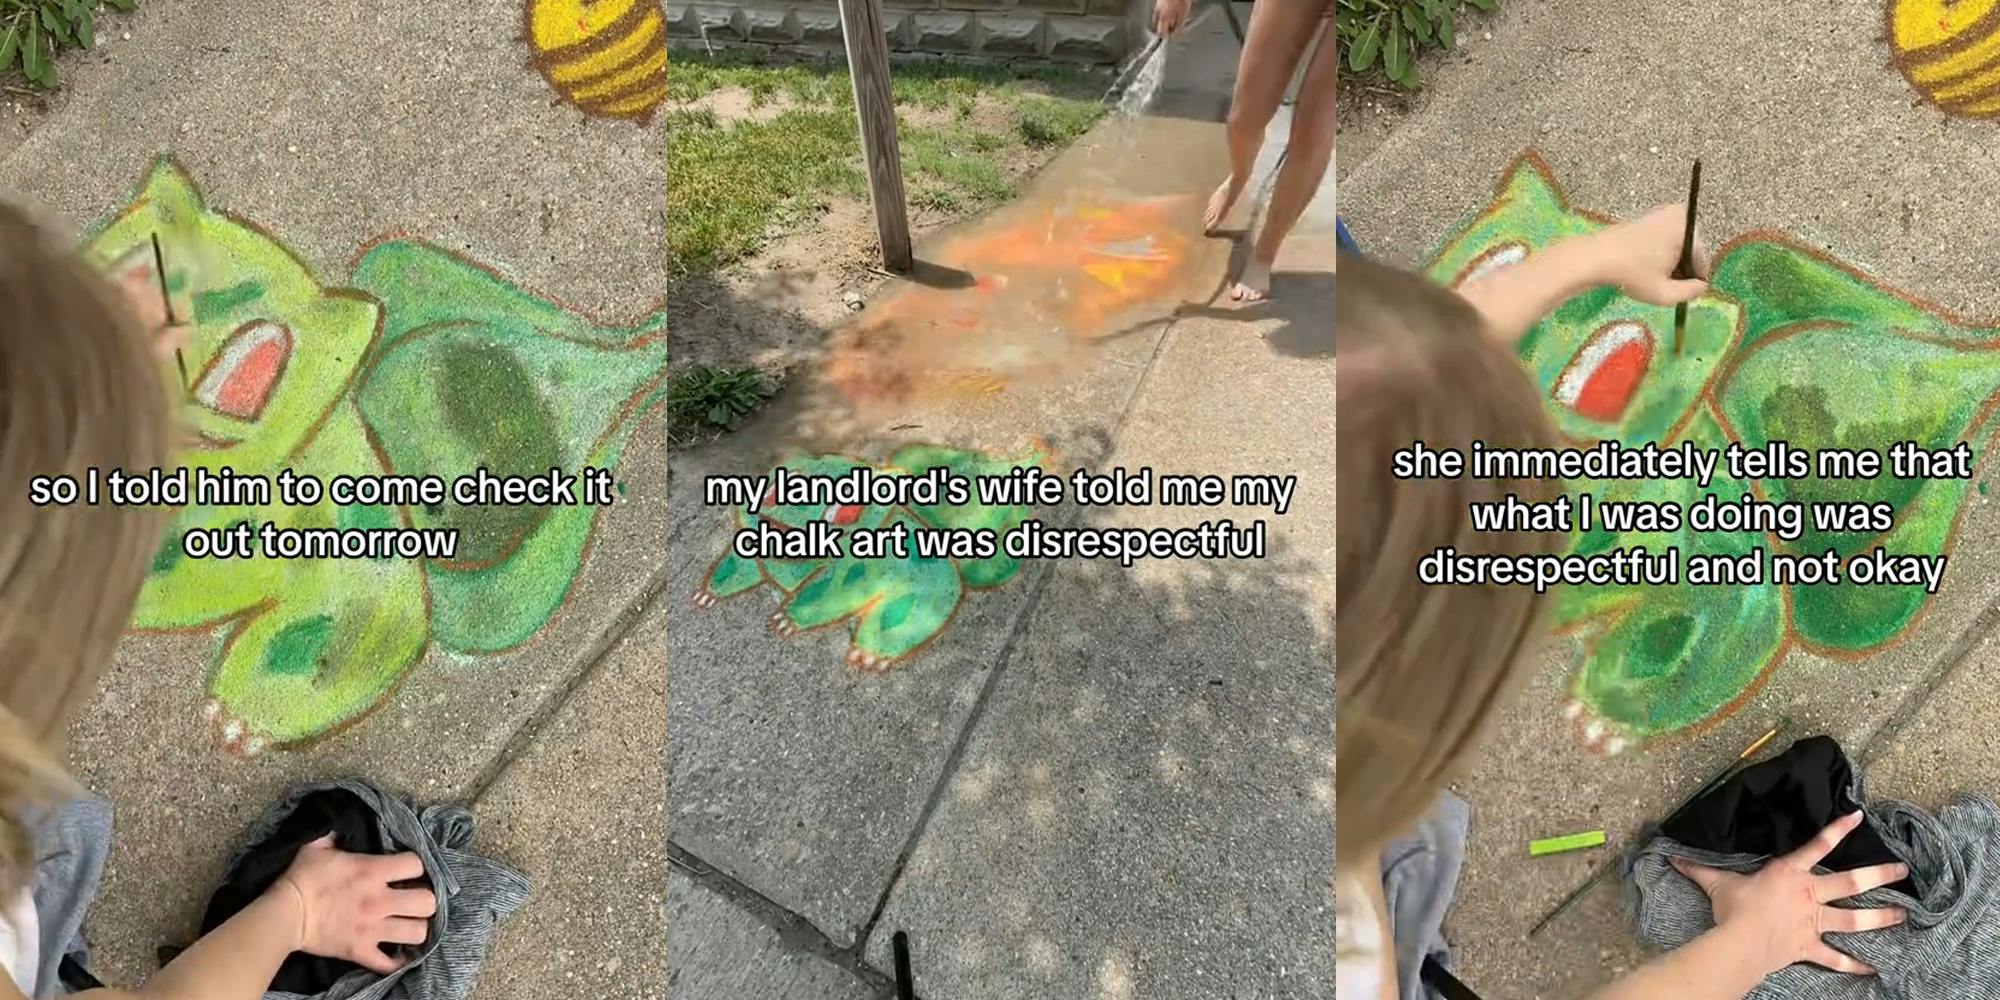 person making chalk art on sidewalk with caption "so I told him to come check it out tomorrow (l) person hosing chalk art on sidewalk with caption "my landlord's wife told me my chalk art was disrespectful" (c) person making chalk art on sidewalk with caption "she immediately tells me that what I was doing was disrespectful and not okay" (r)